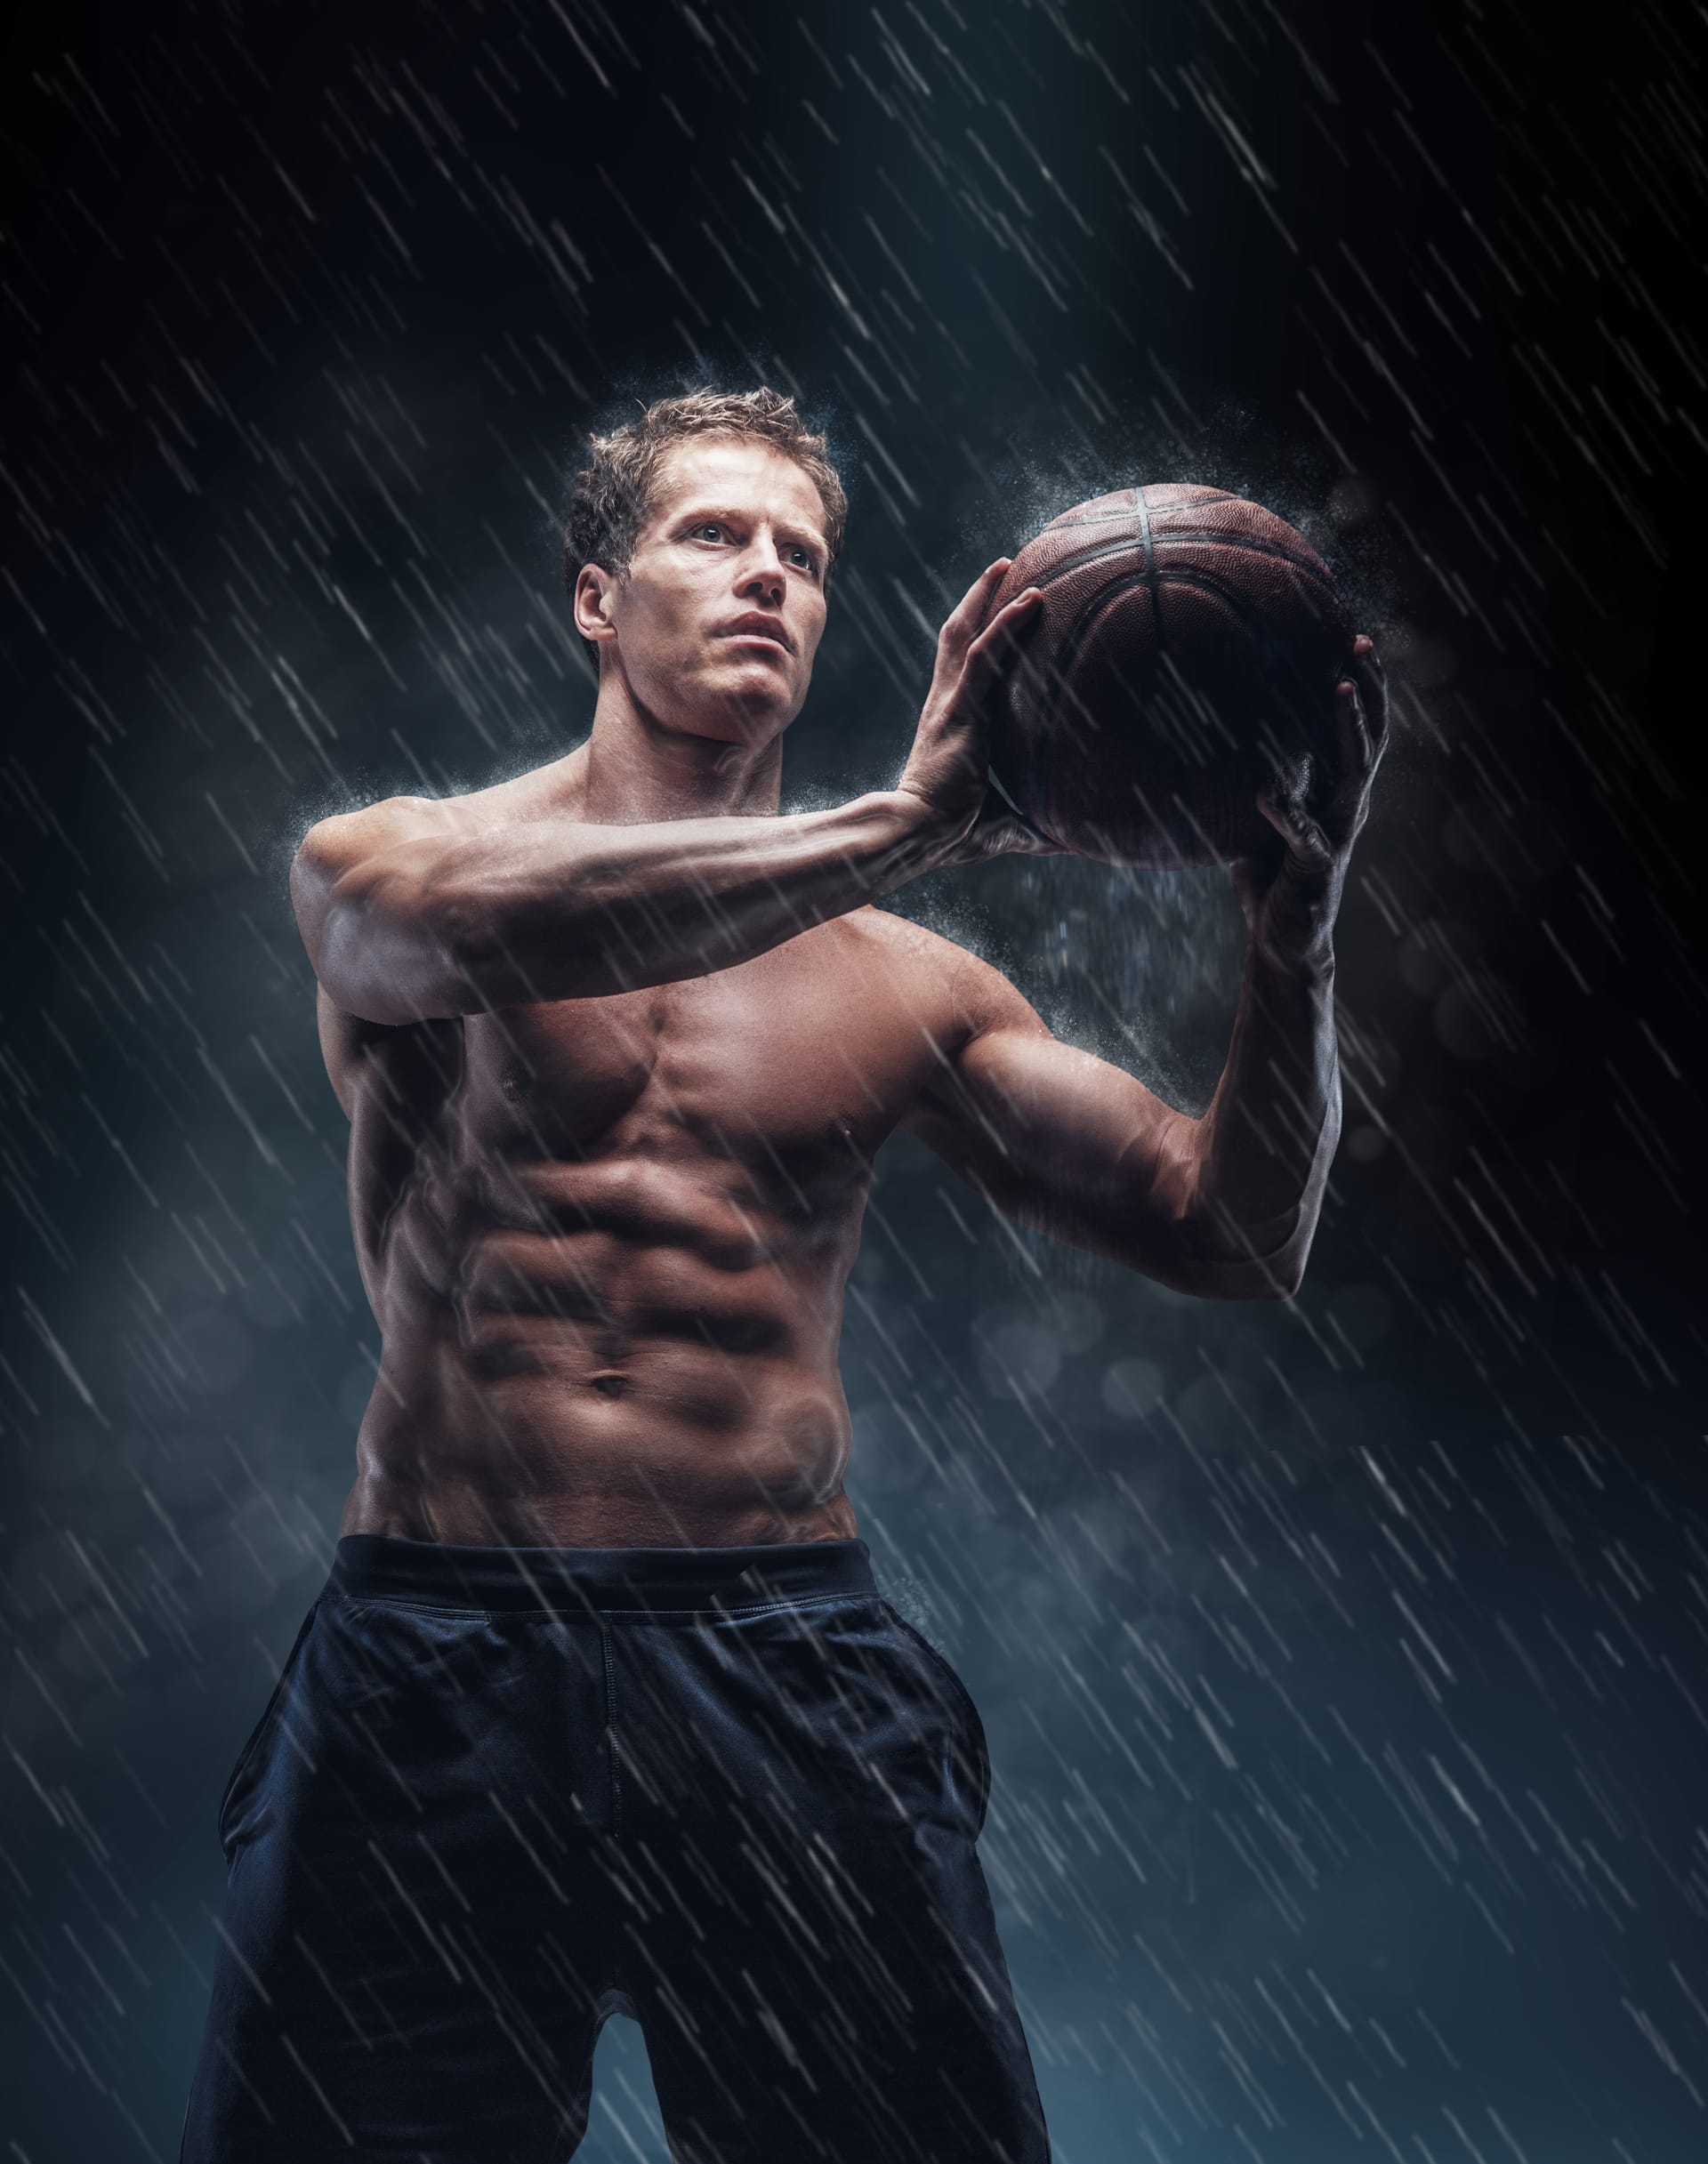 Artistic portrait shirtless wet bascetball player droplets excellent image